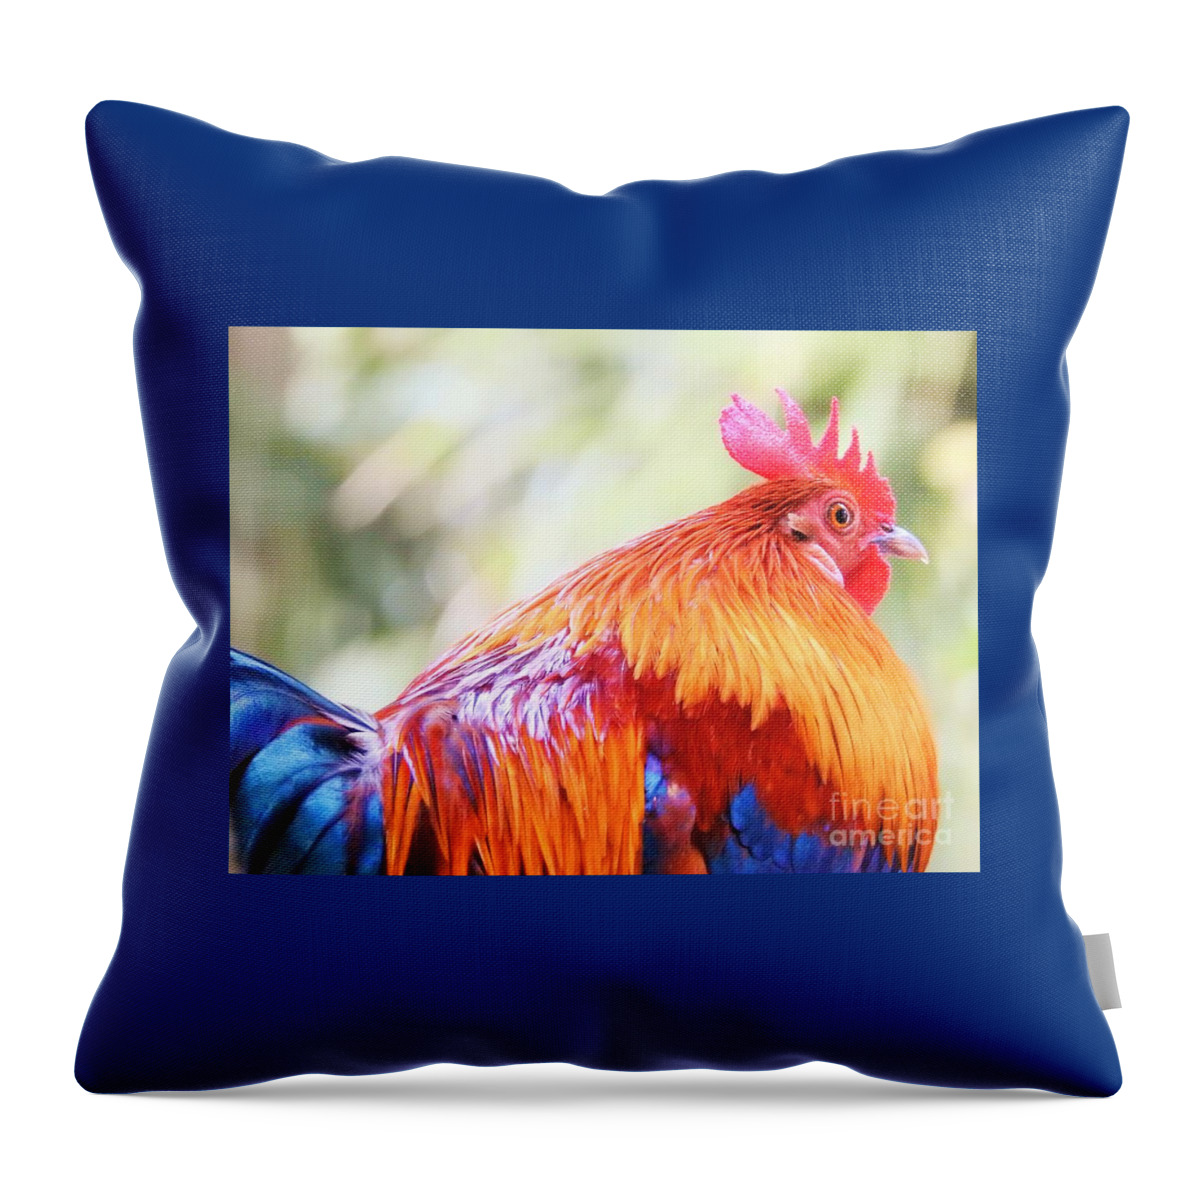 Rooster Throw Pillow featuring the photograph The Beauty Of Wild by Jan Gelders